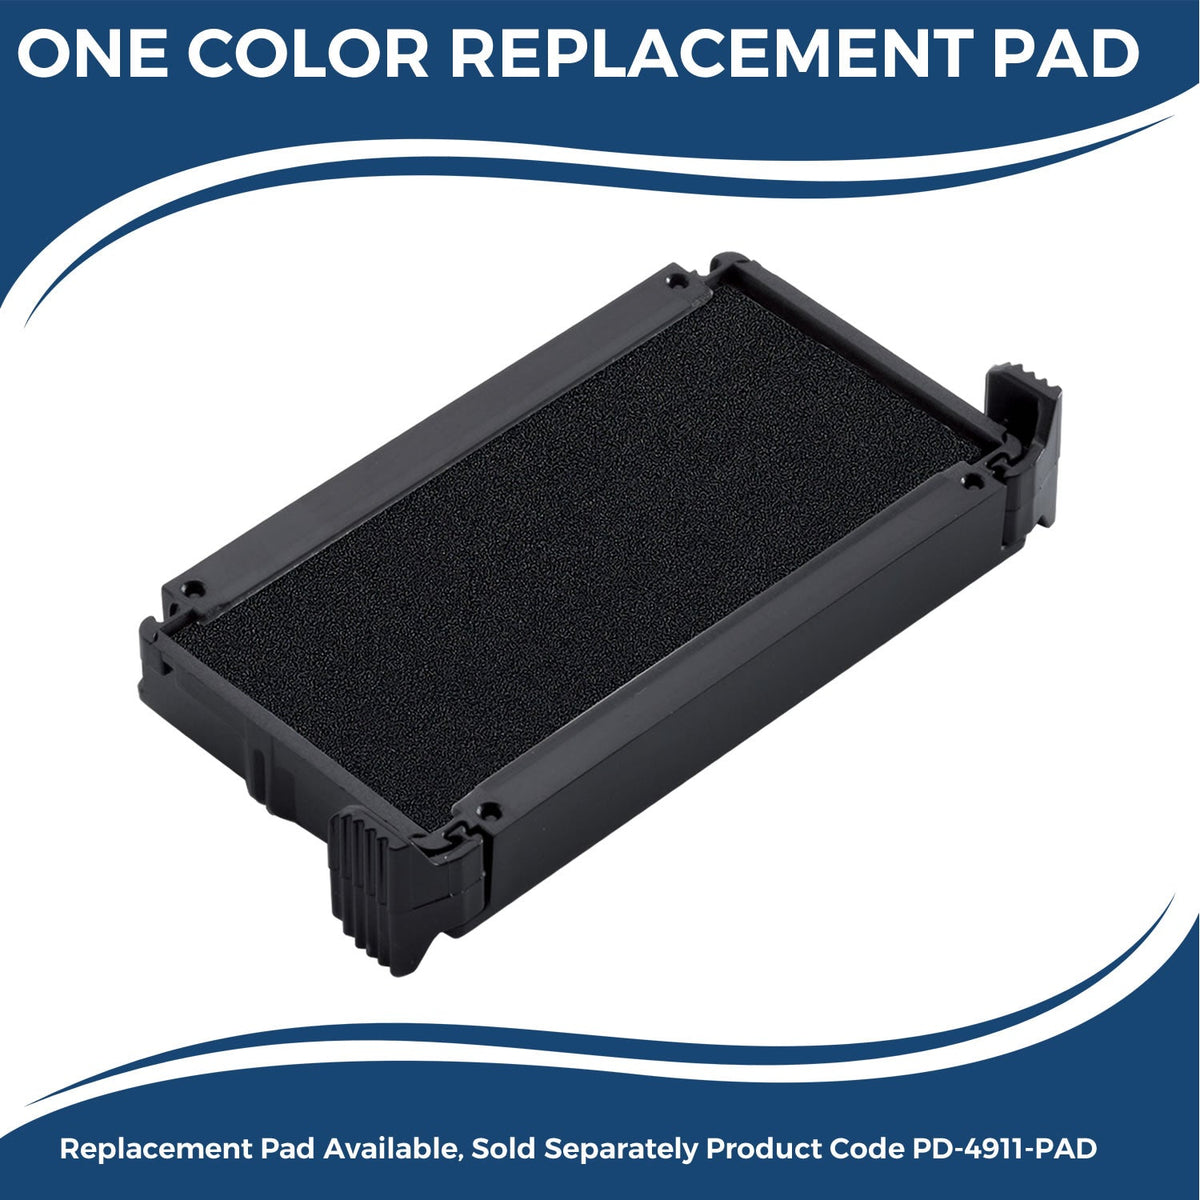 Replacement Pad for Self-Inking Lets review this with Lamp Stamp